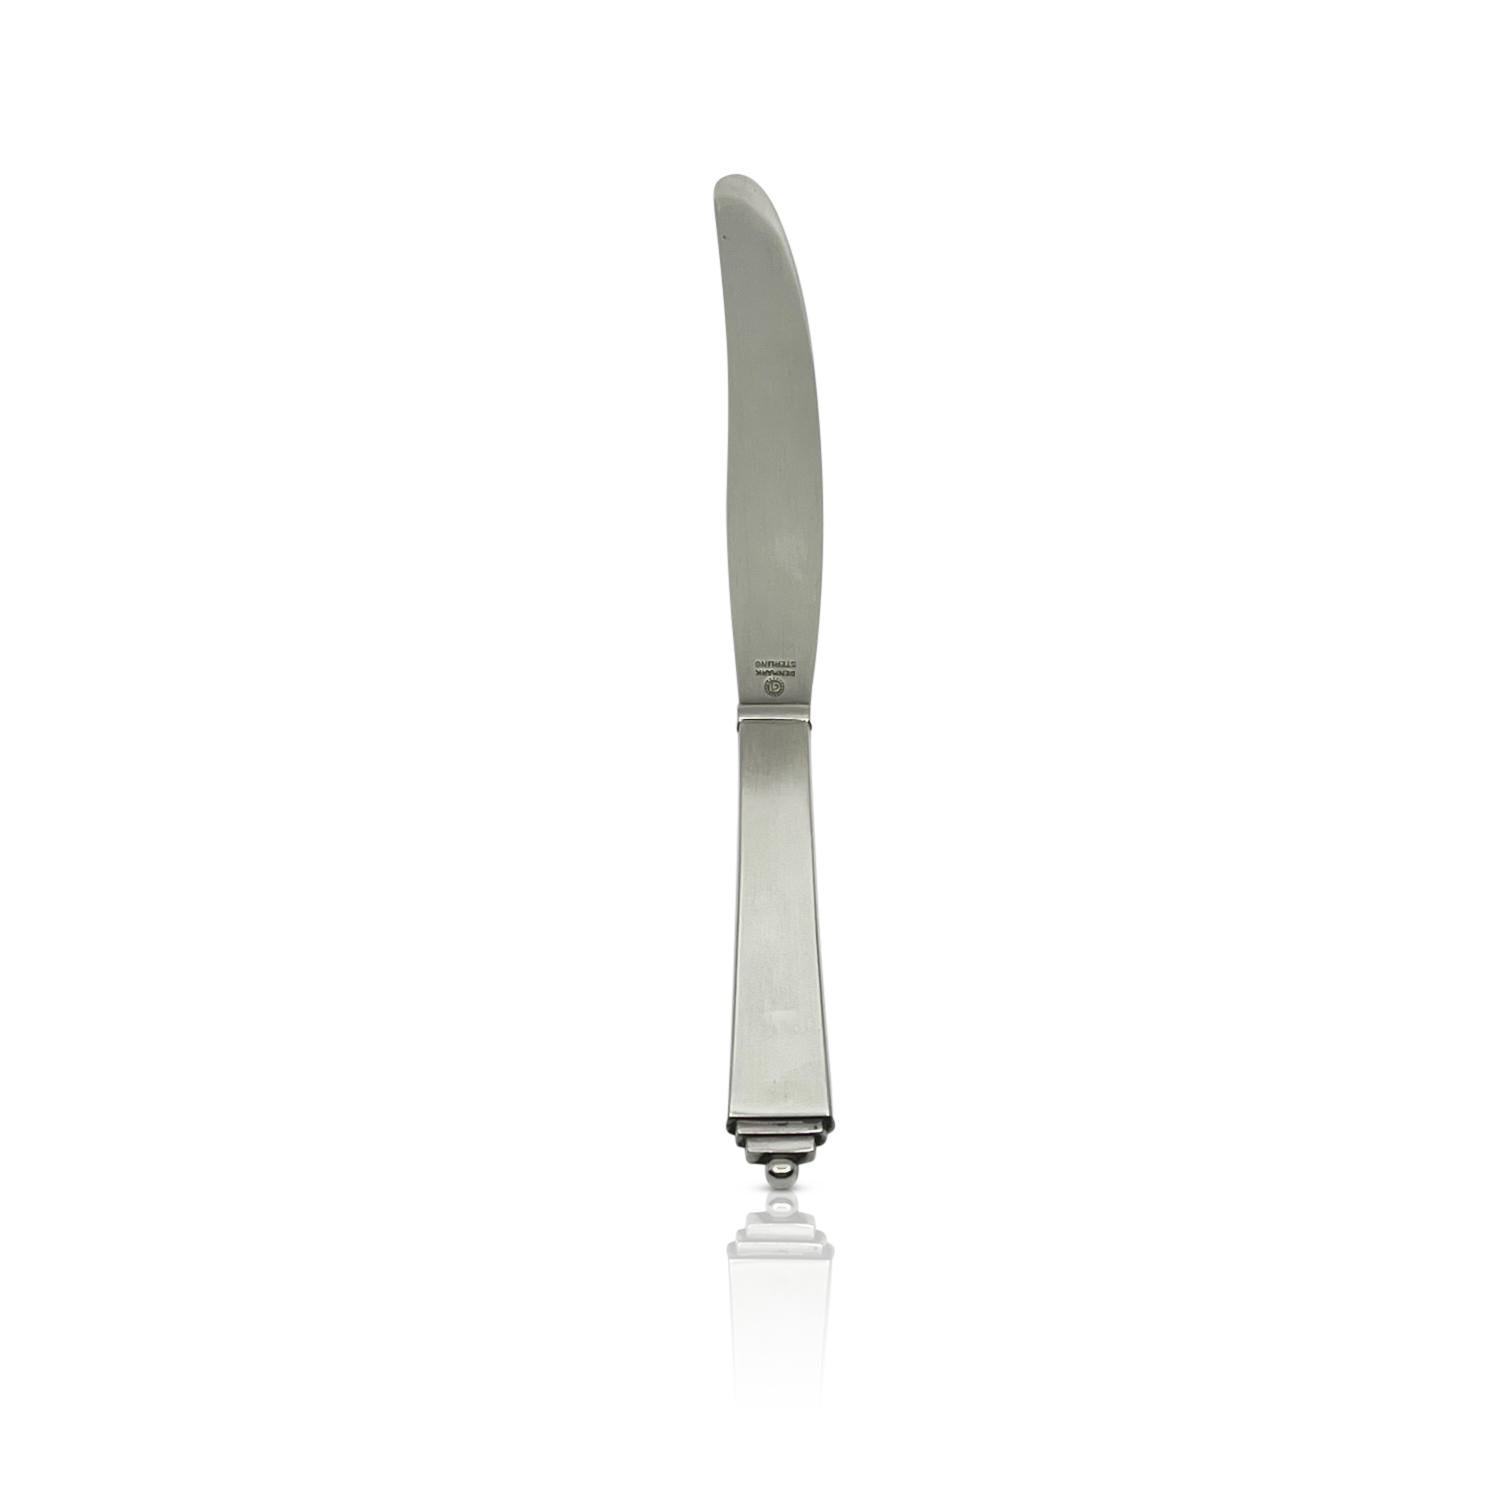 A vintage sterling silver Georg Jensen fruit/child knife, item #045 in the Pyramid pattern, design #15 by Harald Nielsen from 1926. The whole knife, both the handle and the blade, are sterling silver.

Additional information:
Material: Sterling